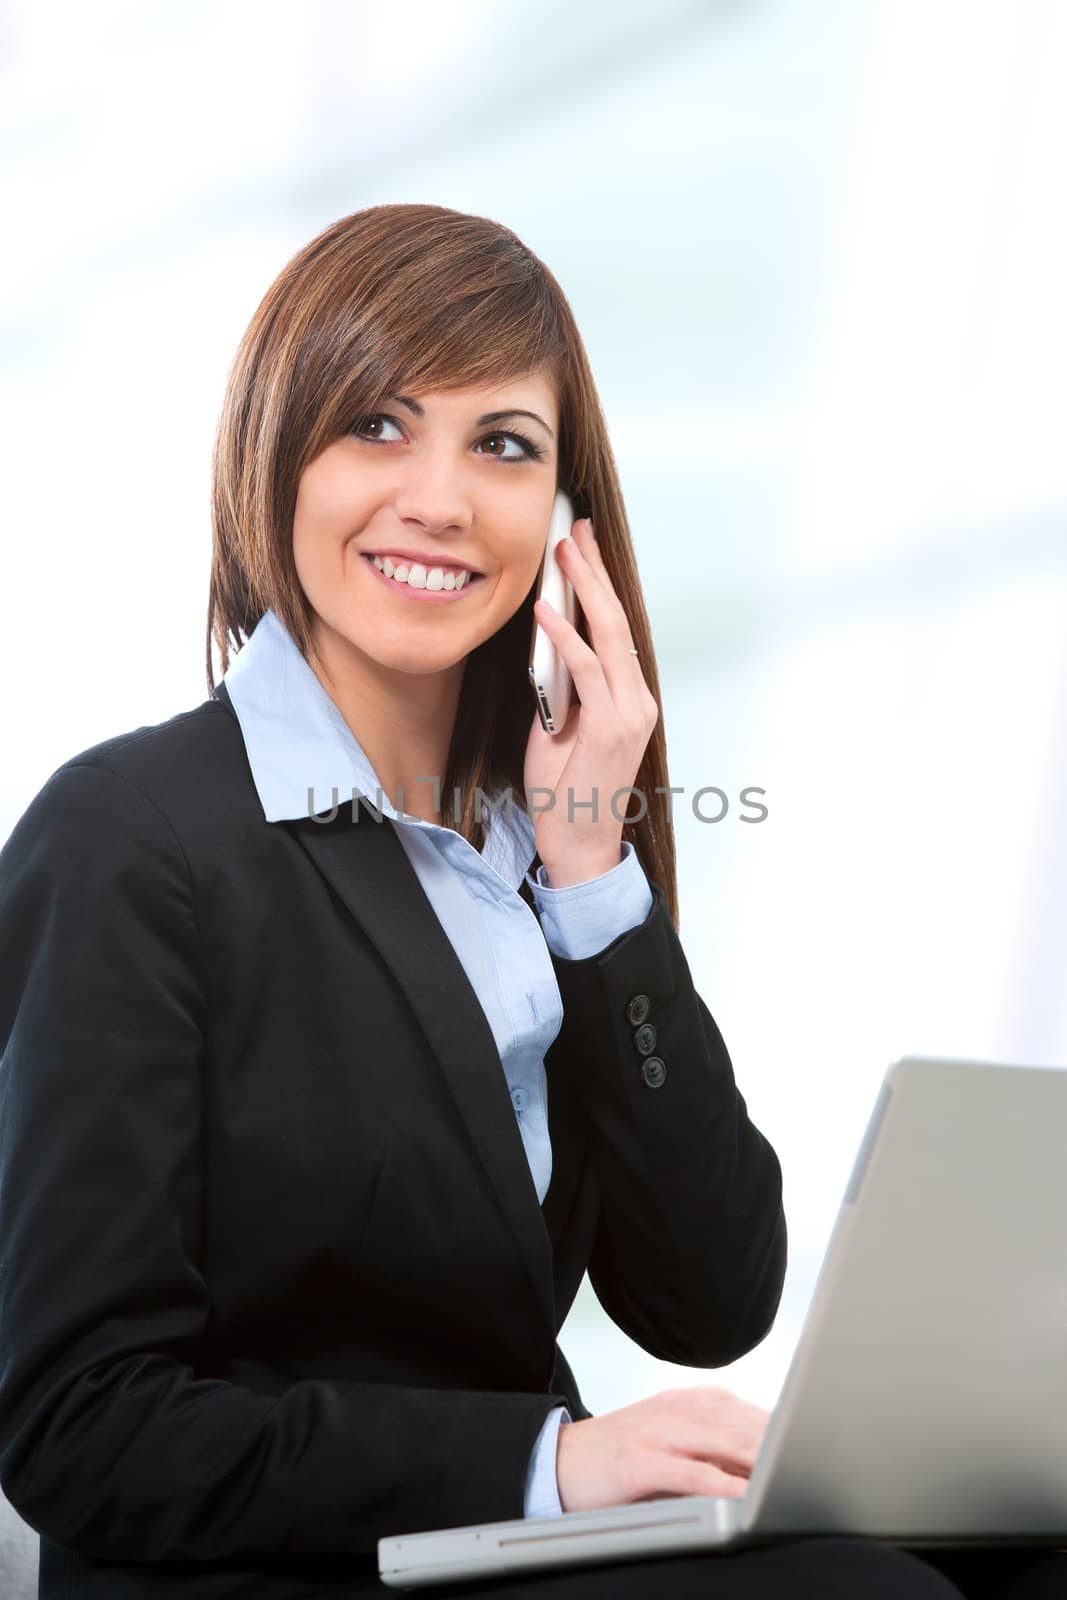 Portrait of attractive businesswoman working on laptop and cell phone.